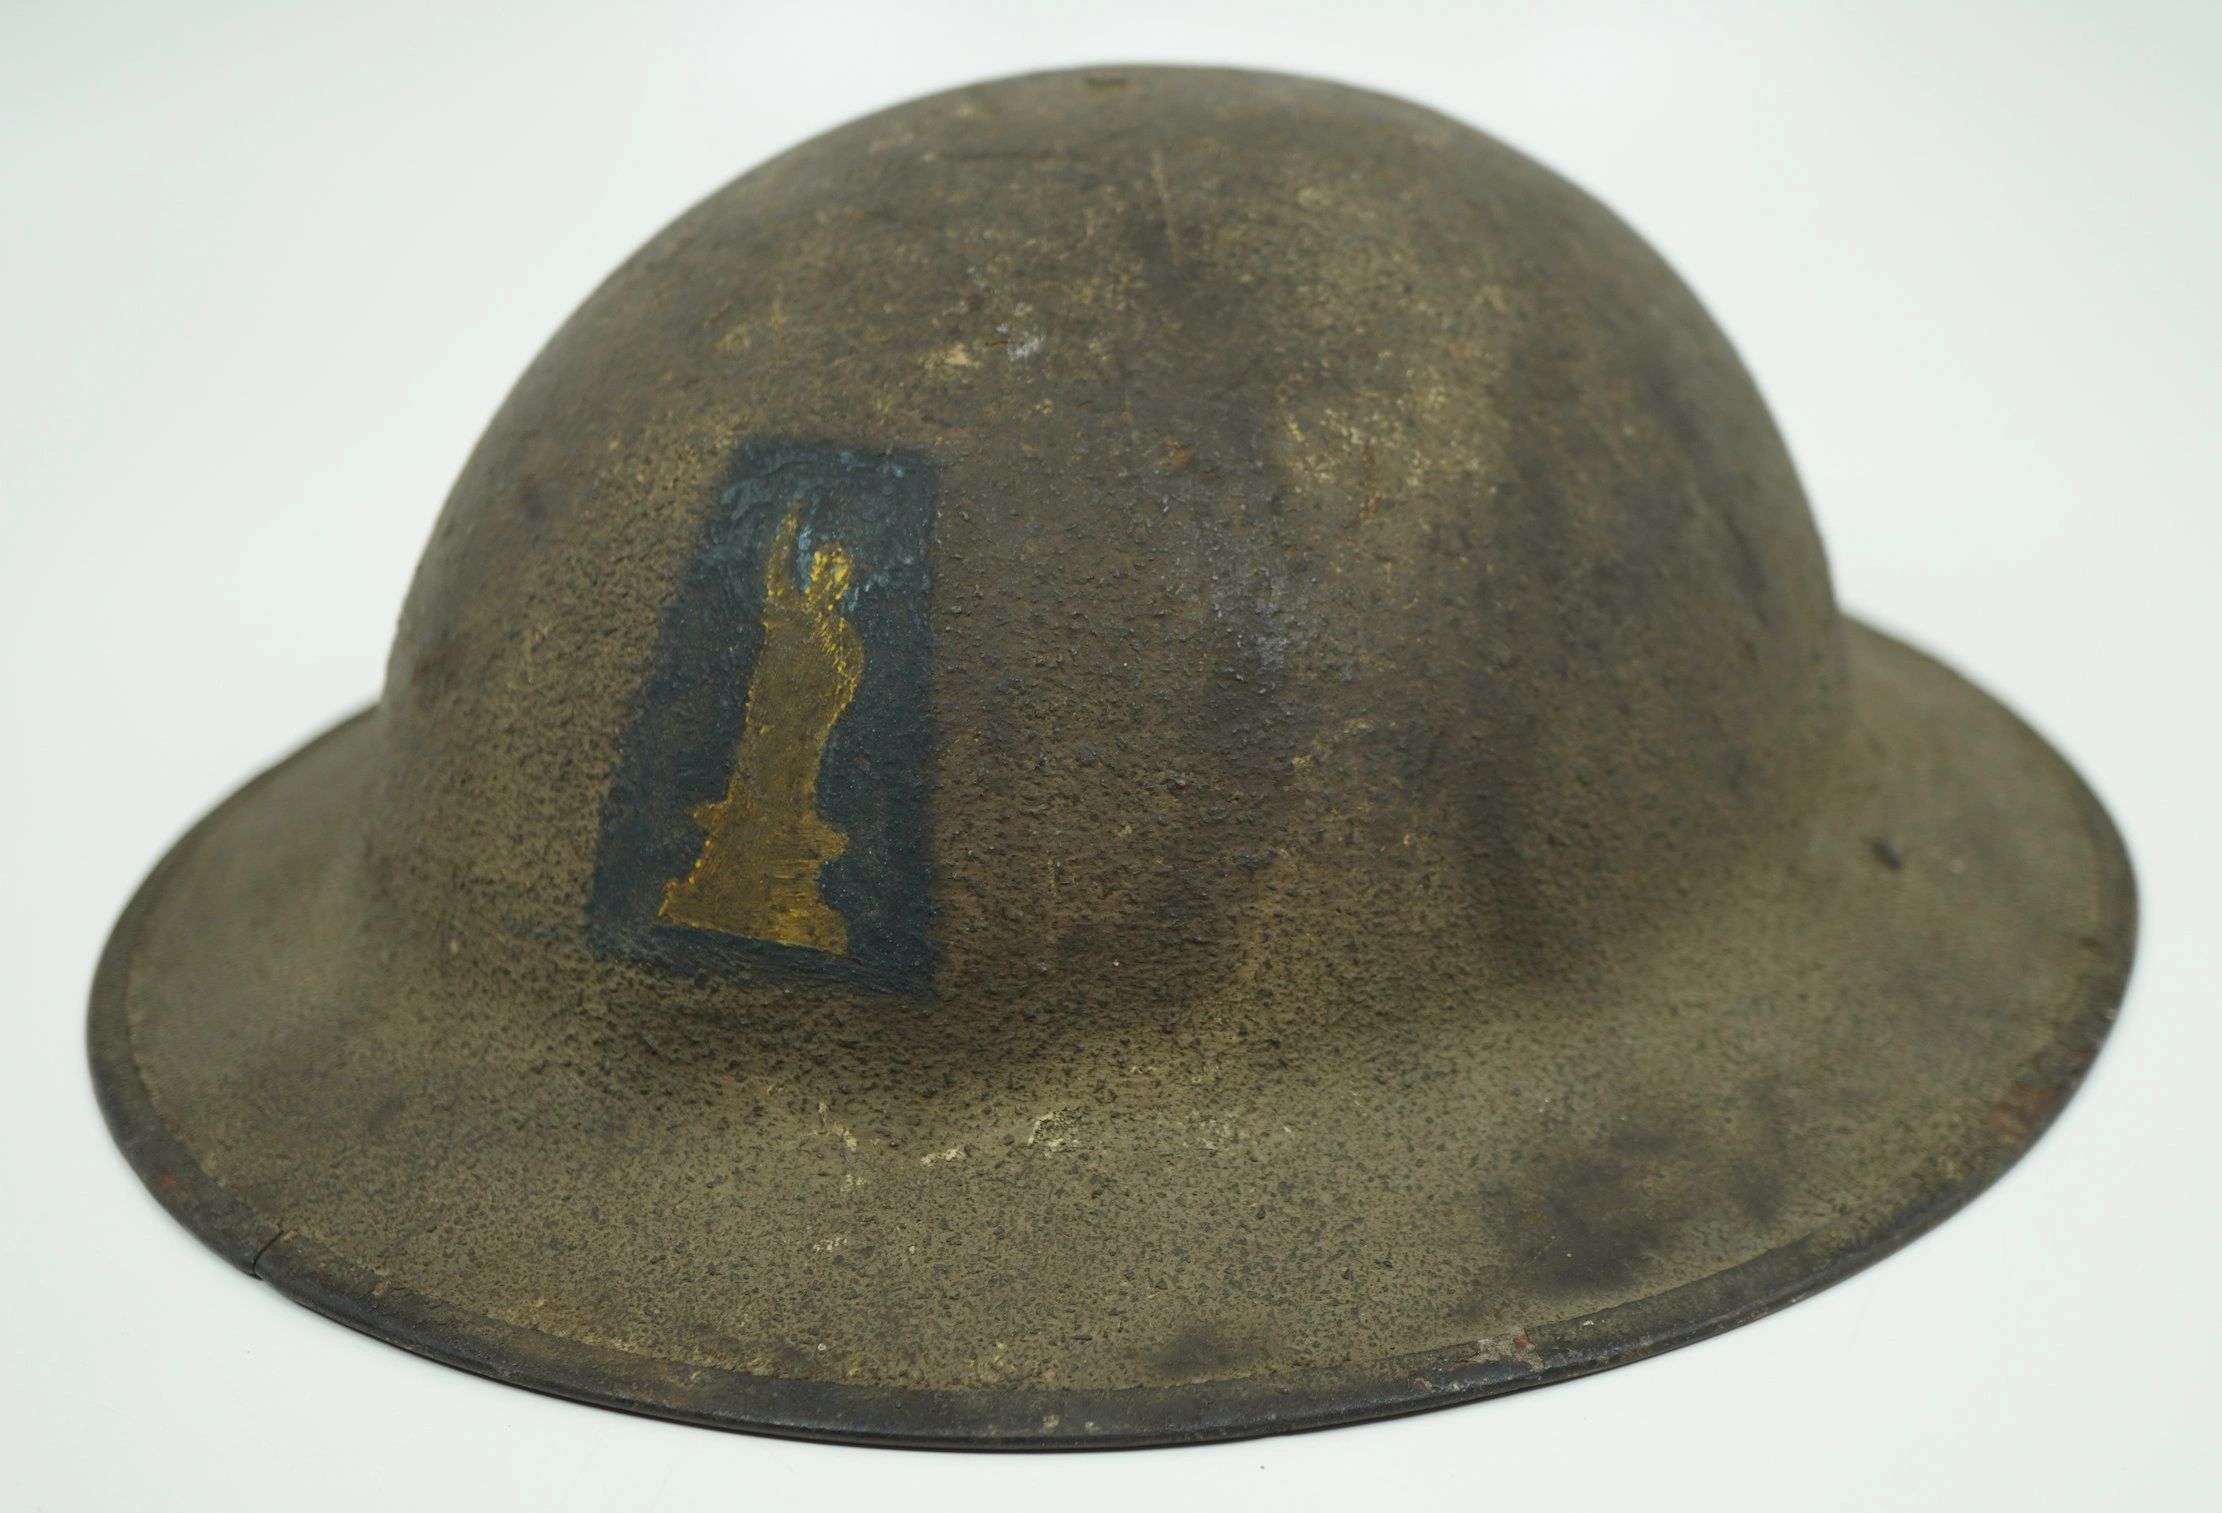 SOLD - WW1 US 77th Infantry Division Helmet